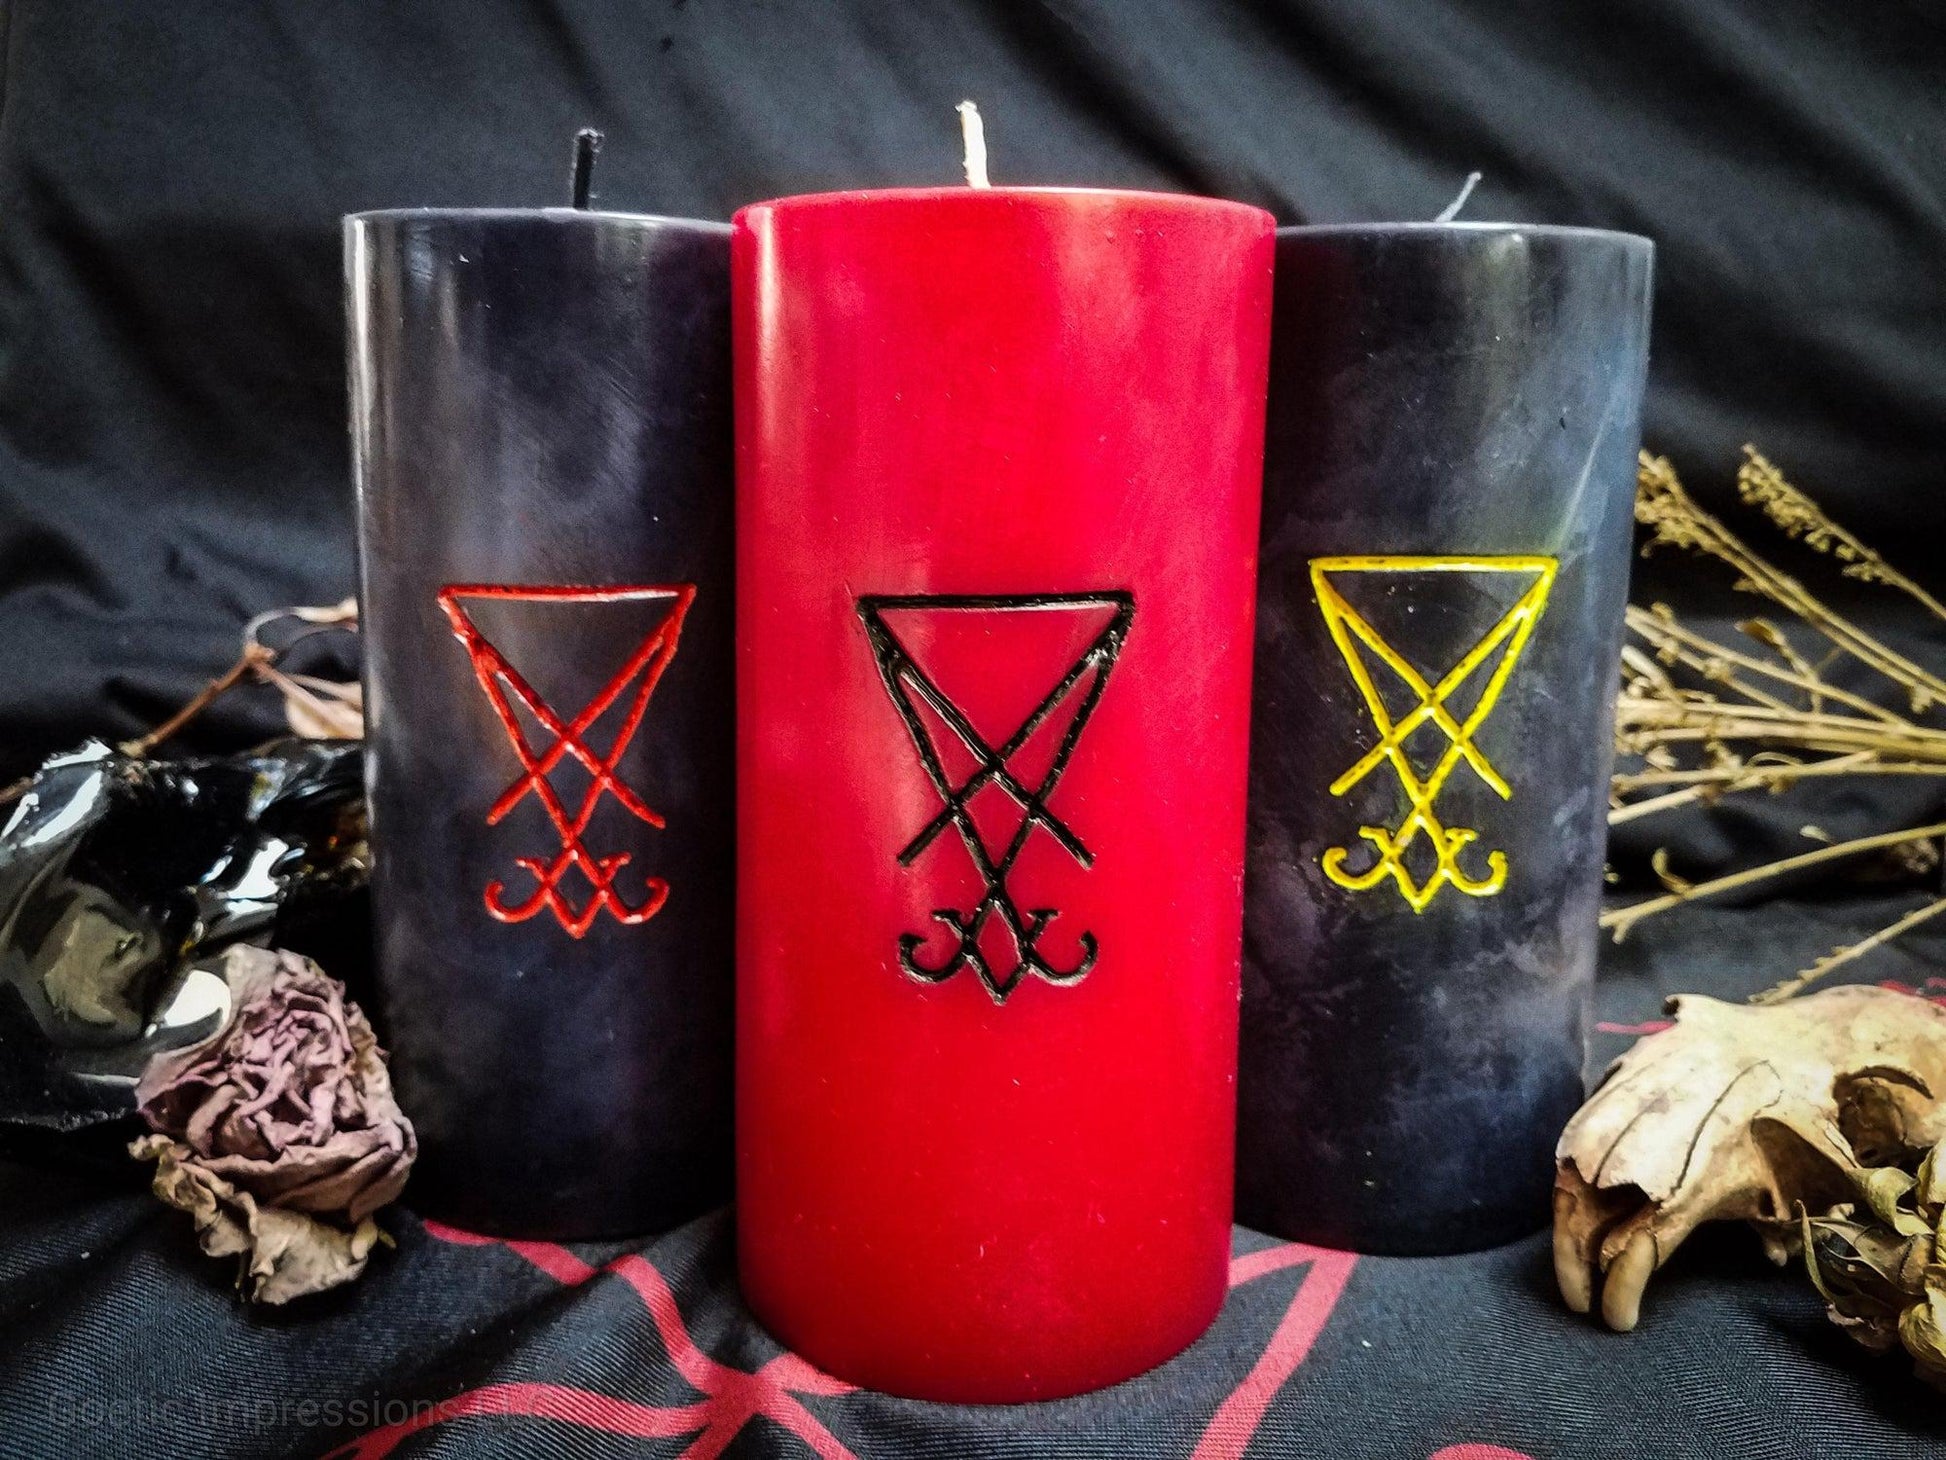 Pillar candles with Lucifer sigils carved into them.